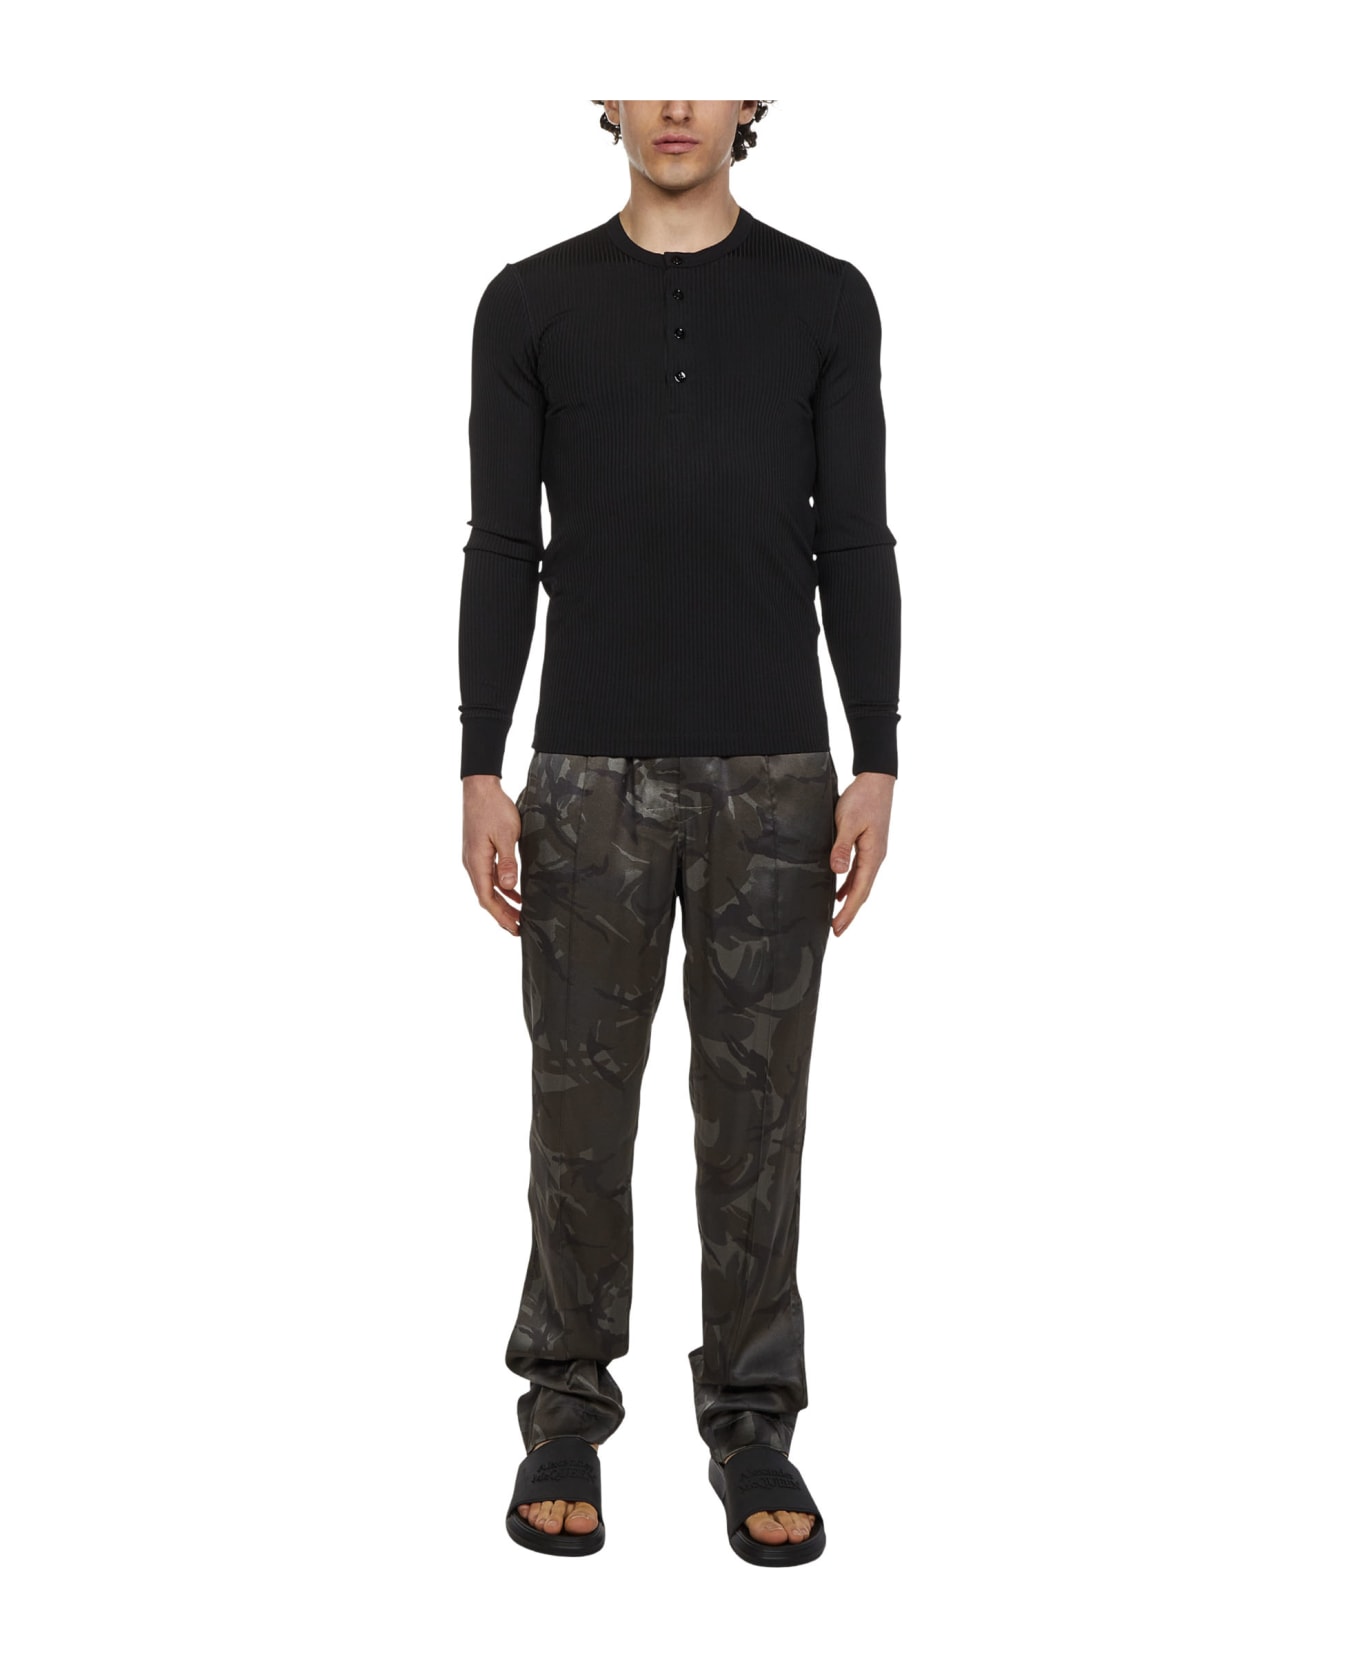 Tom Ford Trousers - Green